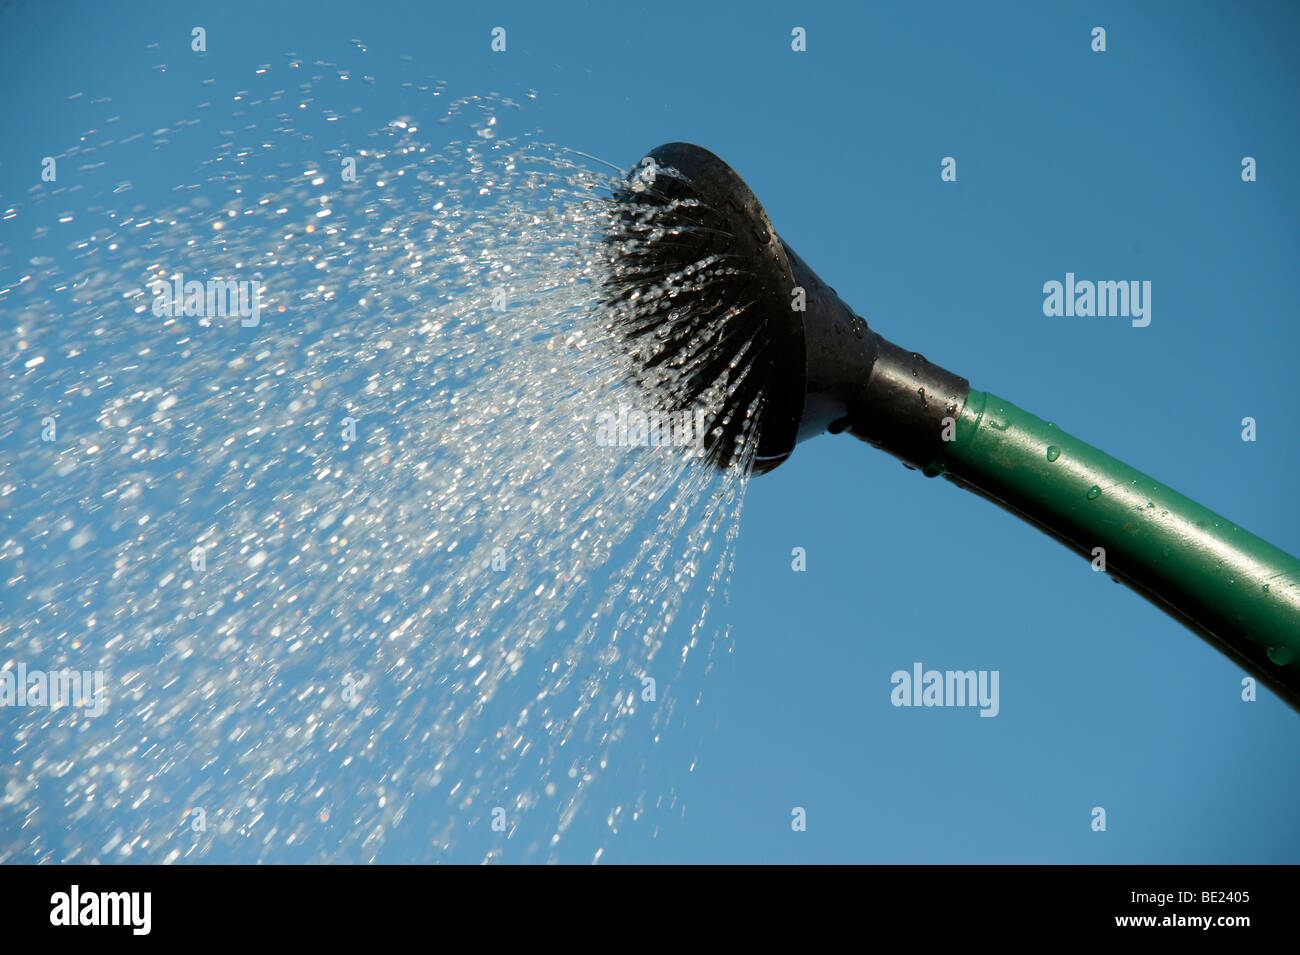 Water pouring from watering can spout against blue sky background sprinkling gardening tool Stock Photo